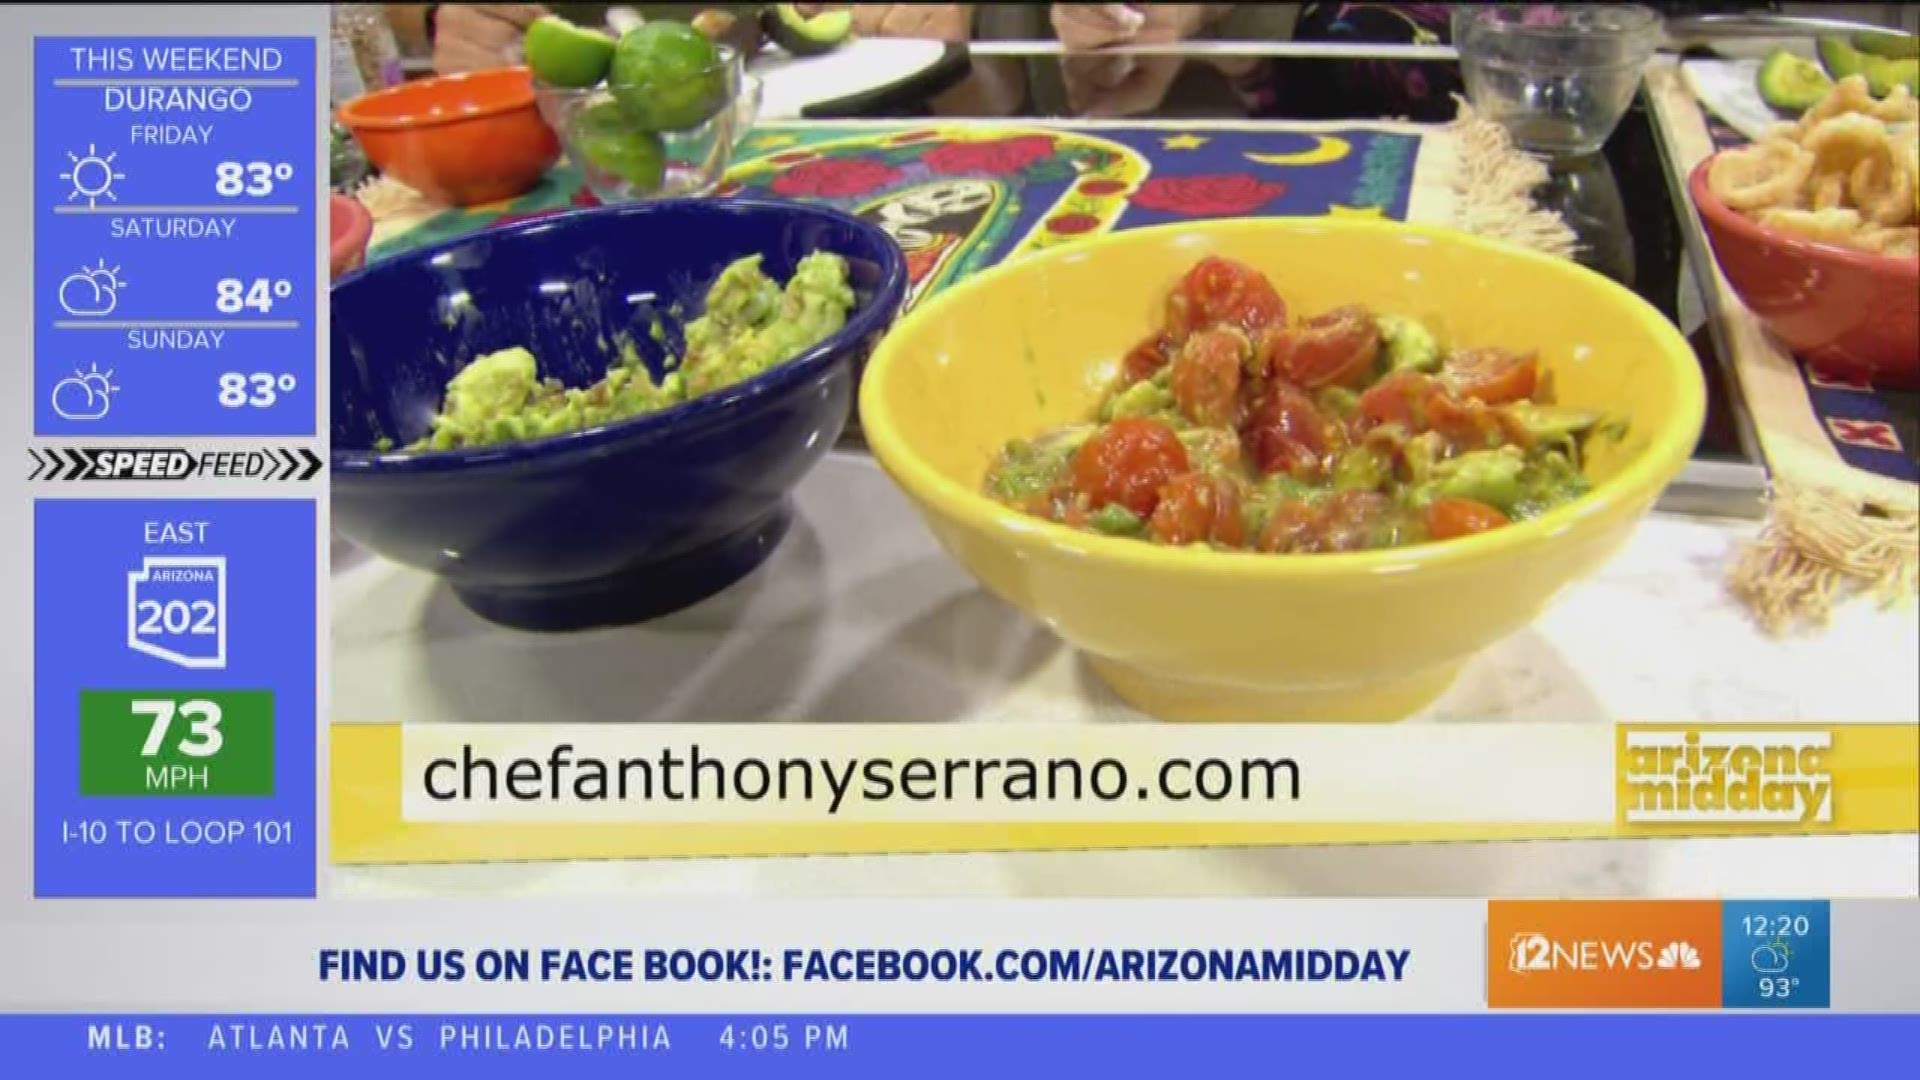 National Guacamole Day is coming up soon and Chef Anthony Serrano shows us three unique recipes to surprise our guests with!